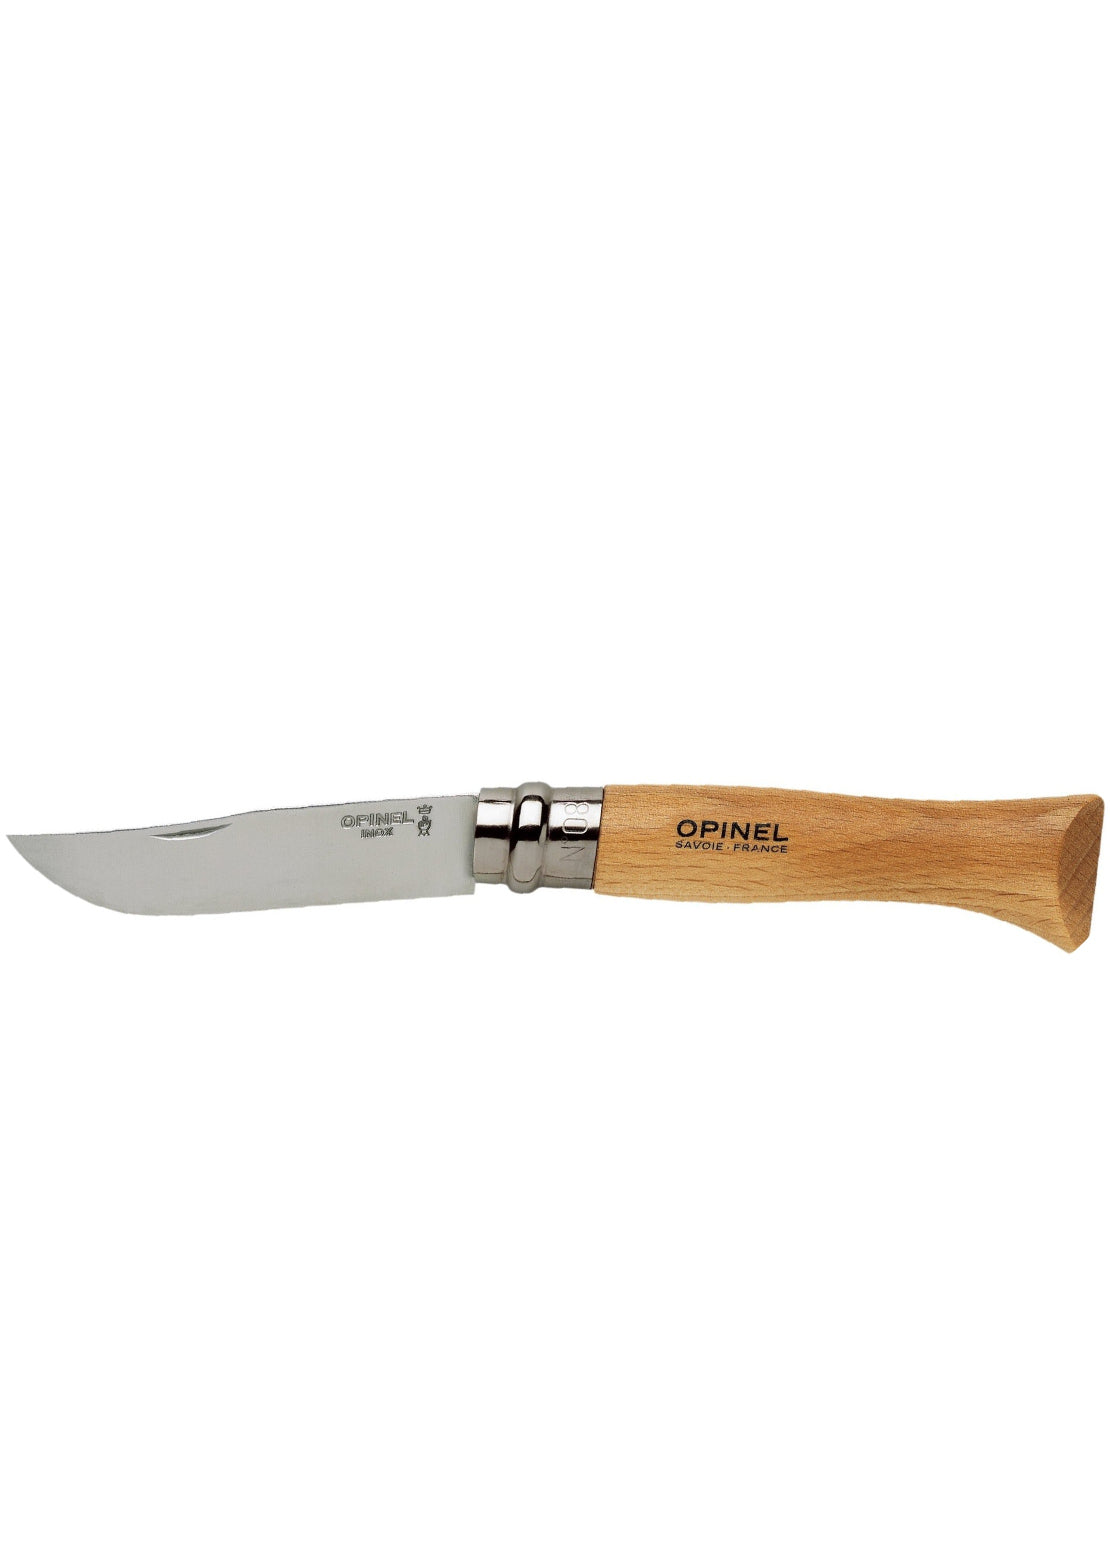 Opinel Tradition Classic N°08 Stainless Steel Knife &amp; Sheath Set Beech Wood